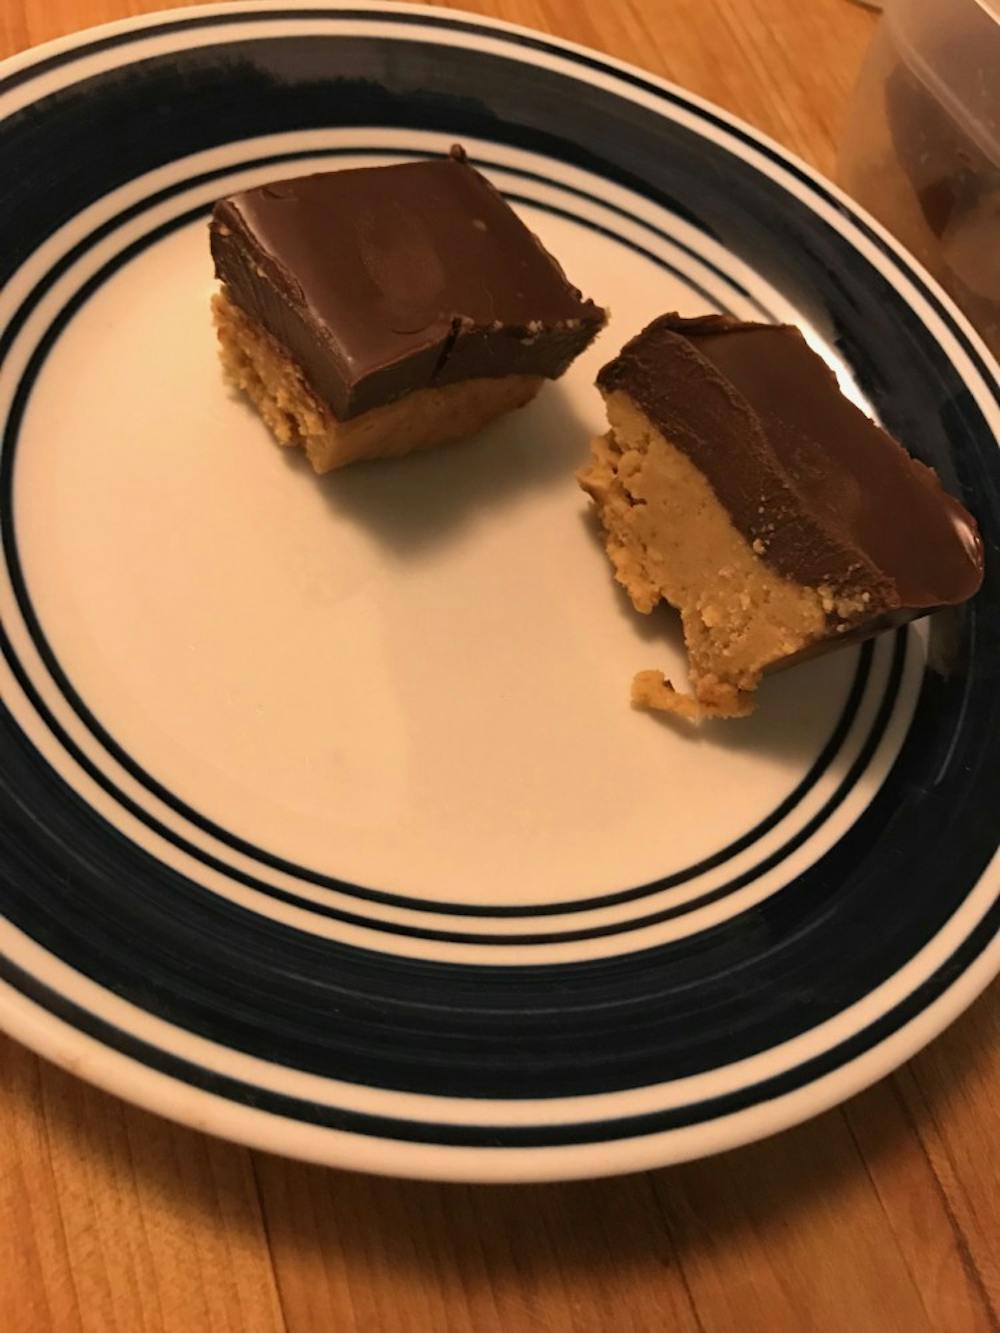 Recipe of the week: Peanut butter squares